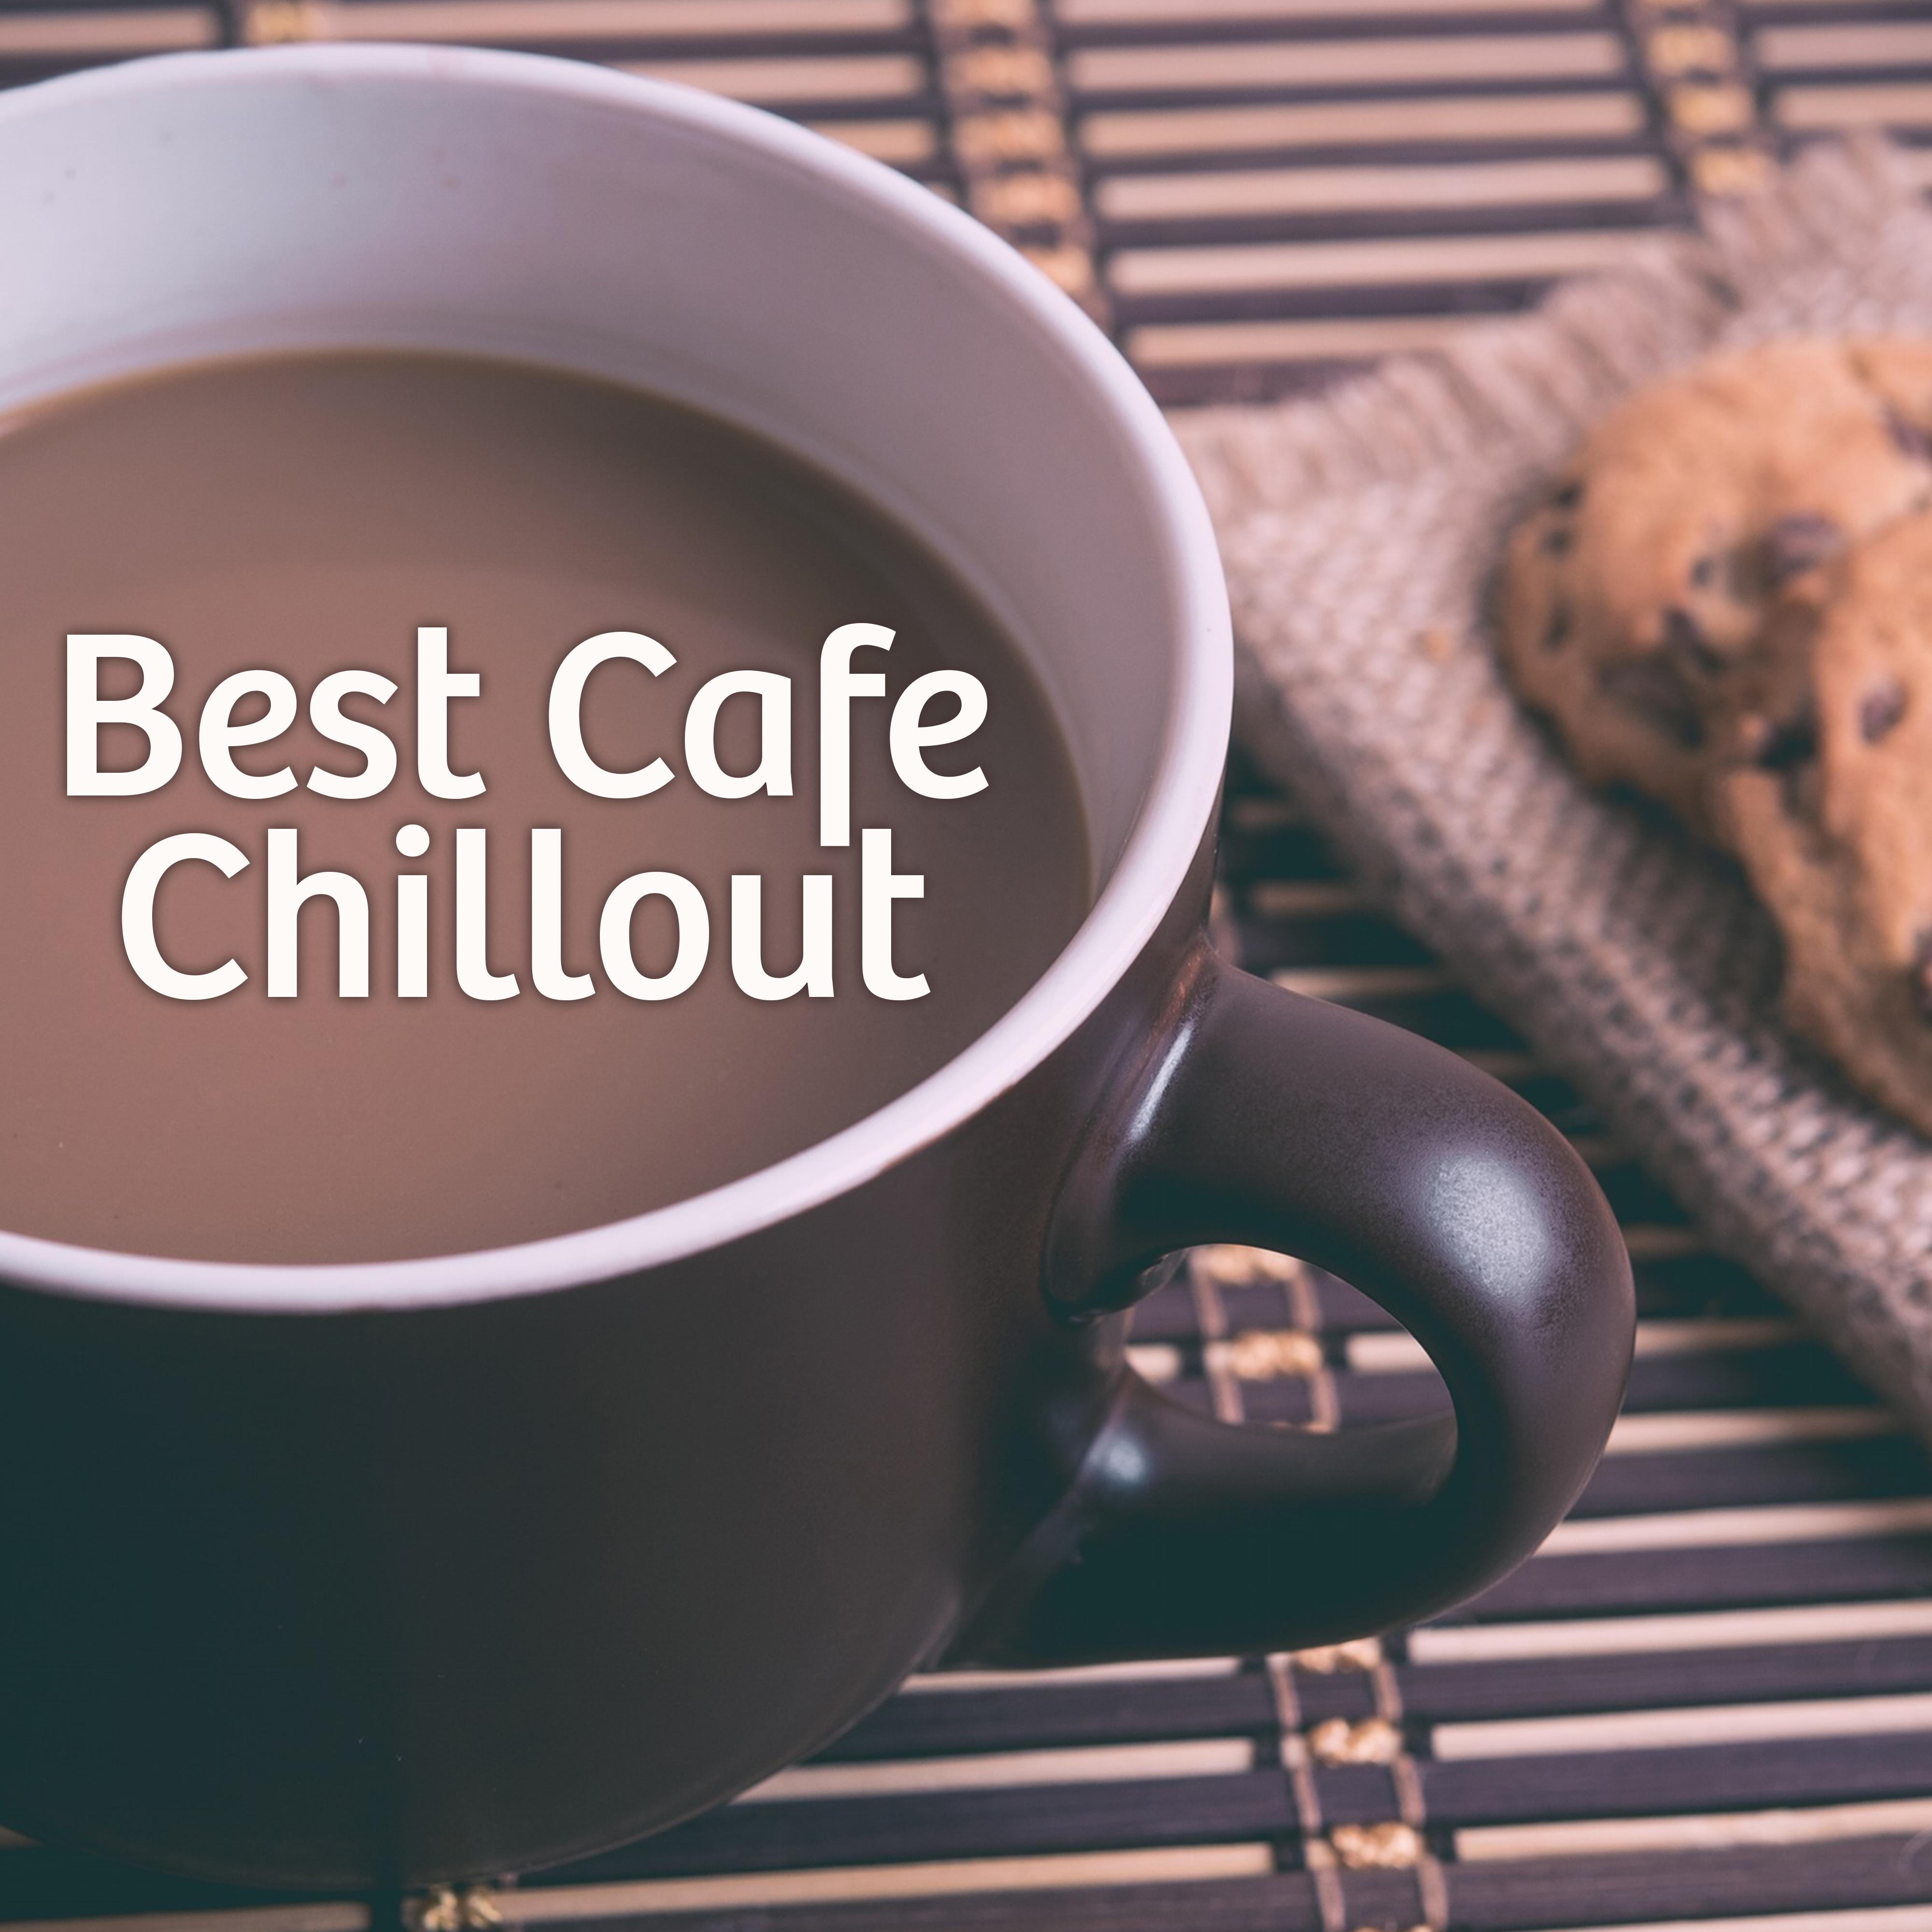 Best Cafe Chillout – Ocean Dreams, Relaxation Time, Pure Waves, Chillout Music, Relaxed Mind, Cocktail Time